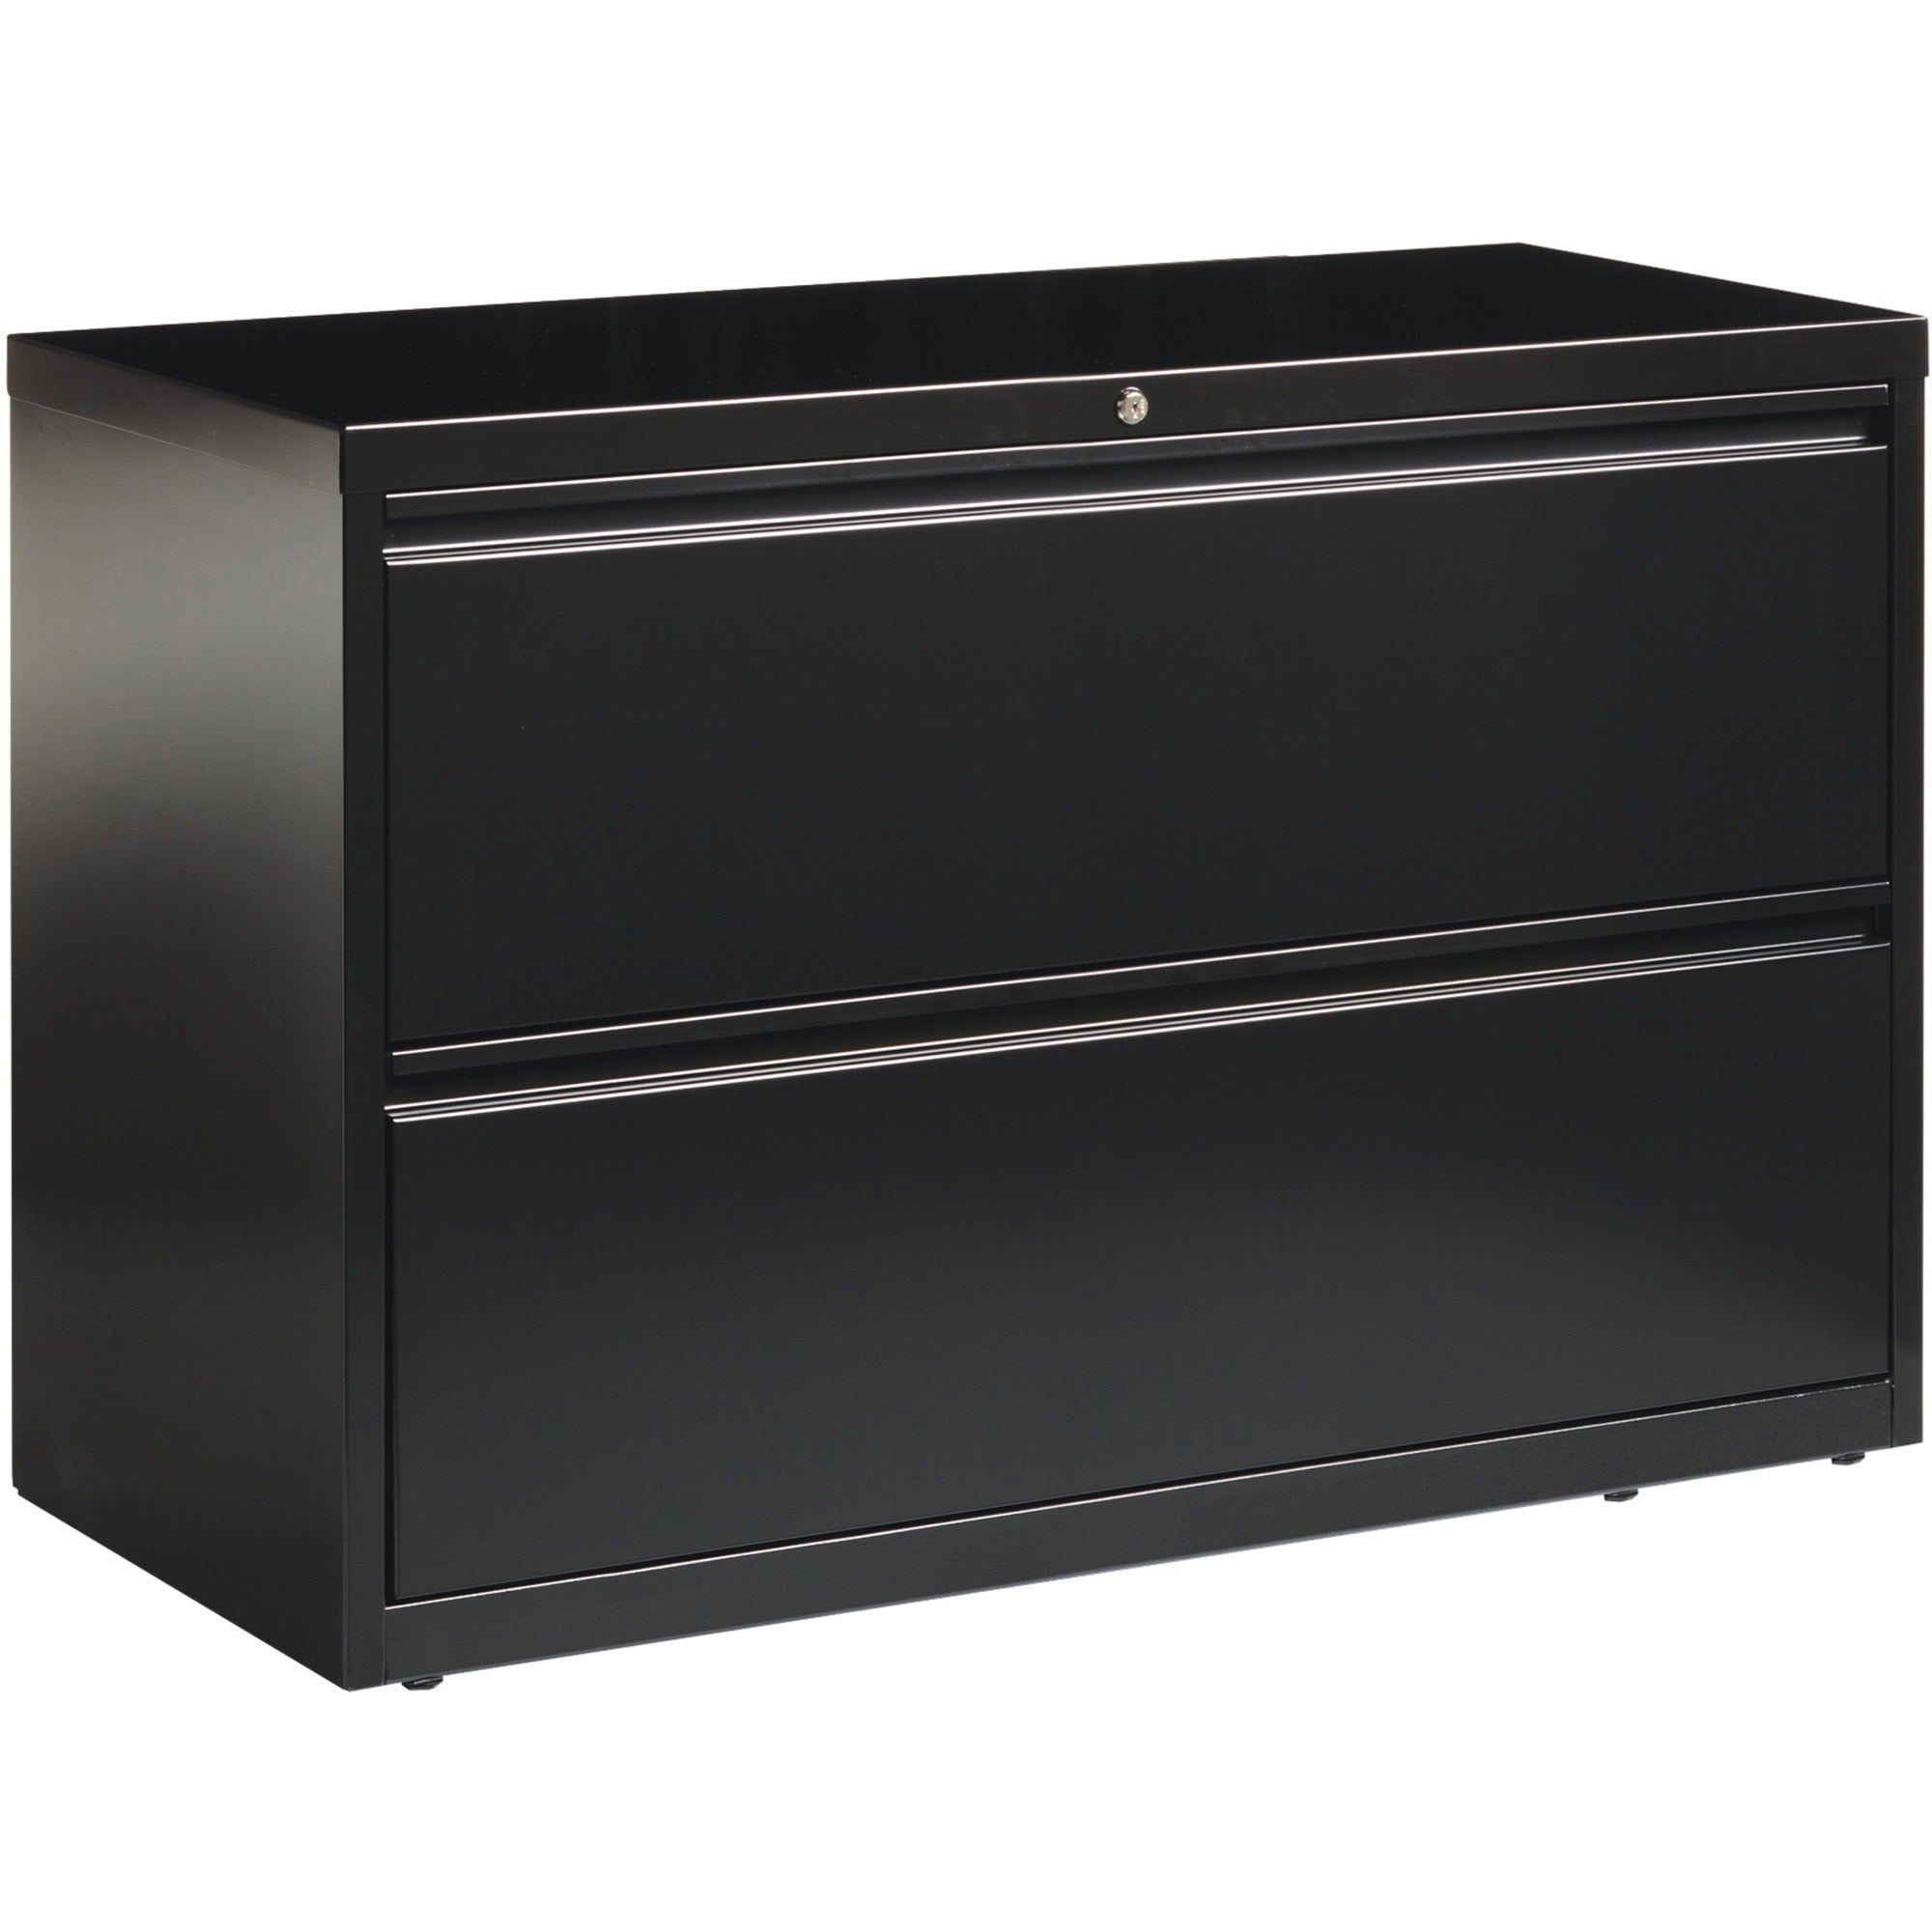 Lorell Fortress Series Lateral File - 42" x 18.6" x 28.1" - 2 x Drawer(s) for File - Letter, Legal, A4 - Lateral - Interlocking, Leveling Glide, Ball-bearing Suspension, Label Holder - Black - Recycled - 